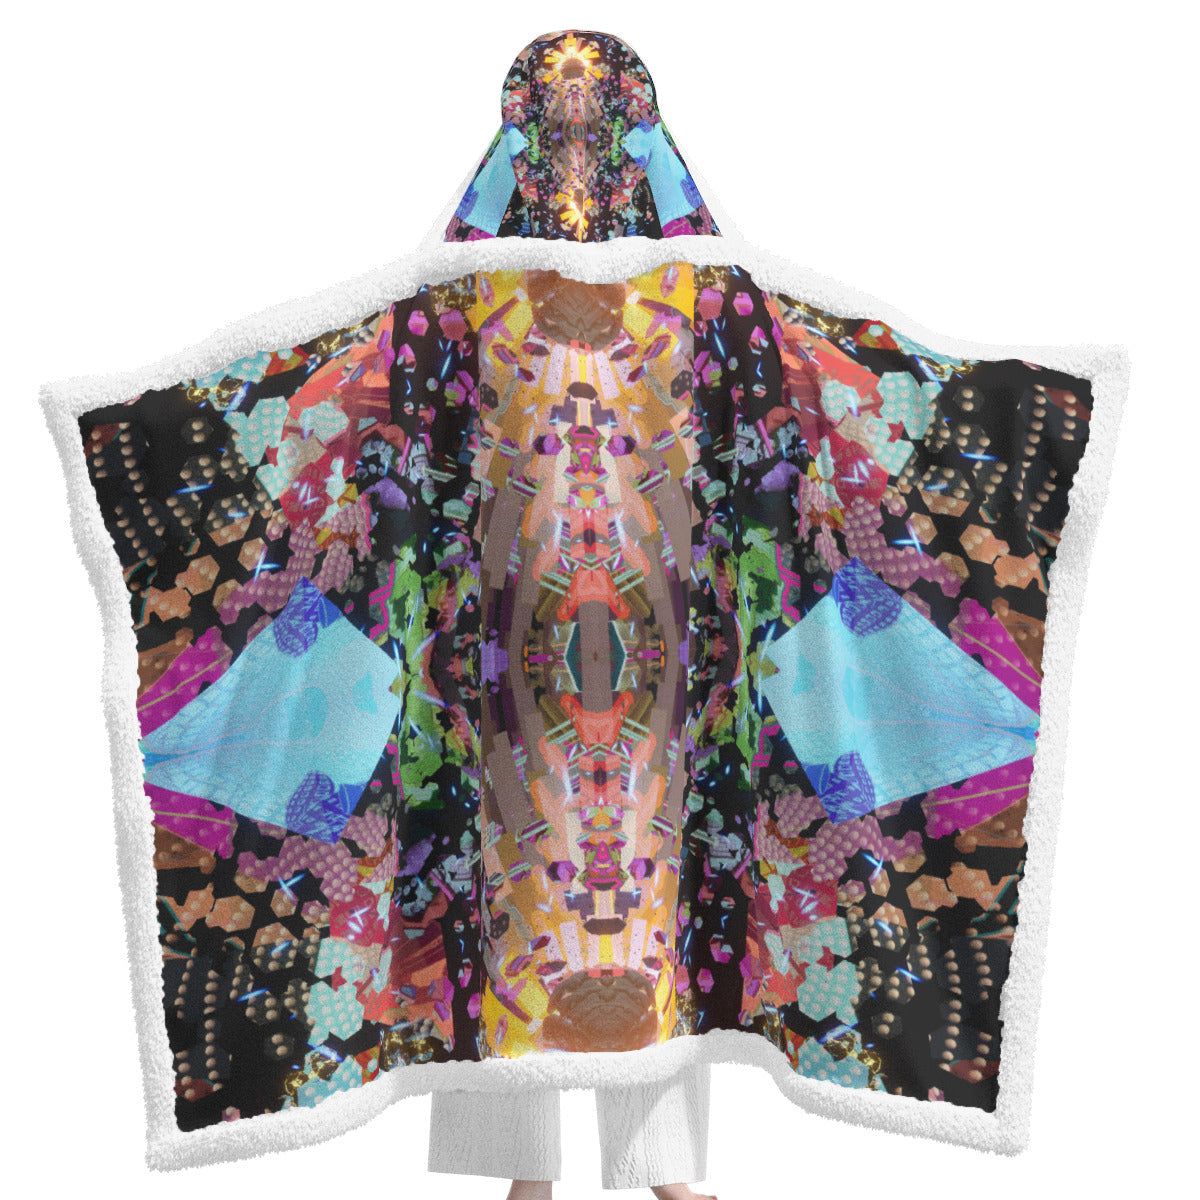 Psychedelic All-Over MicrodoseVR Print Unisex Wearable Hooded Blanket